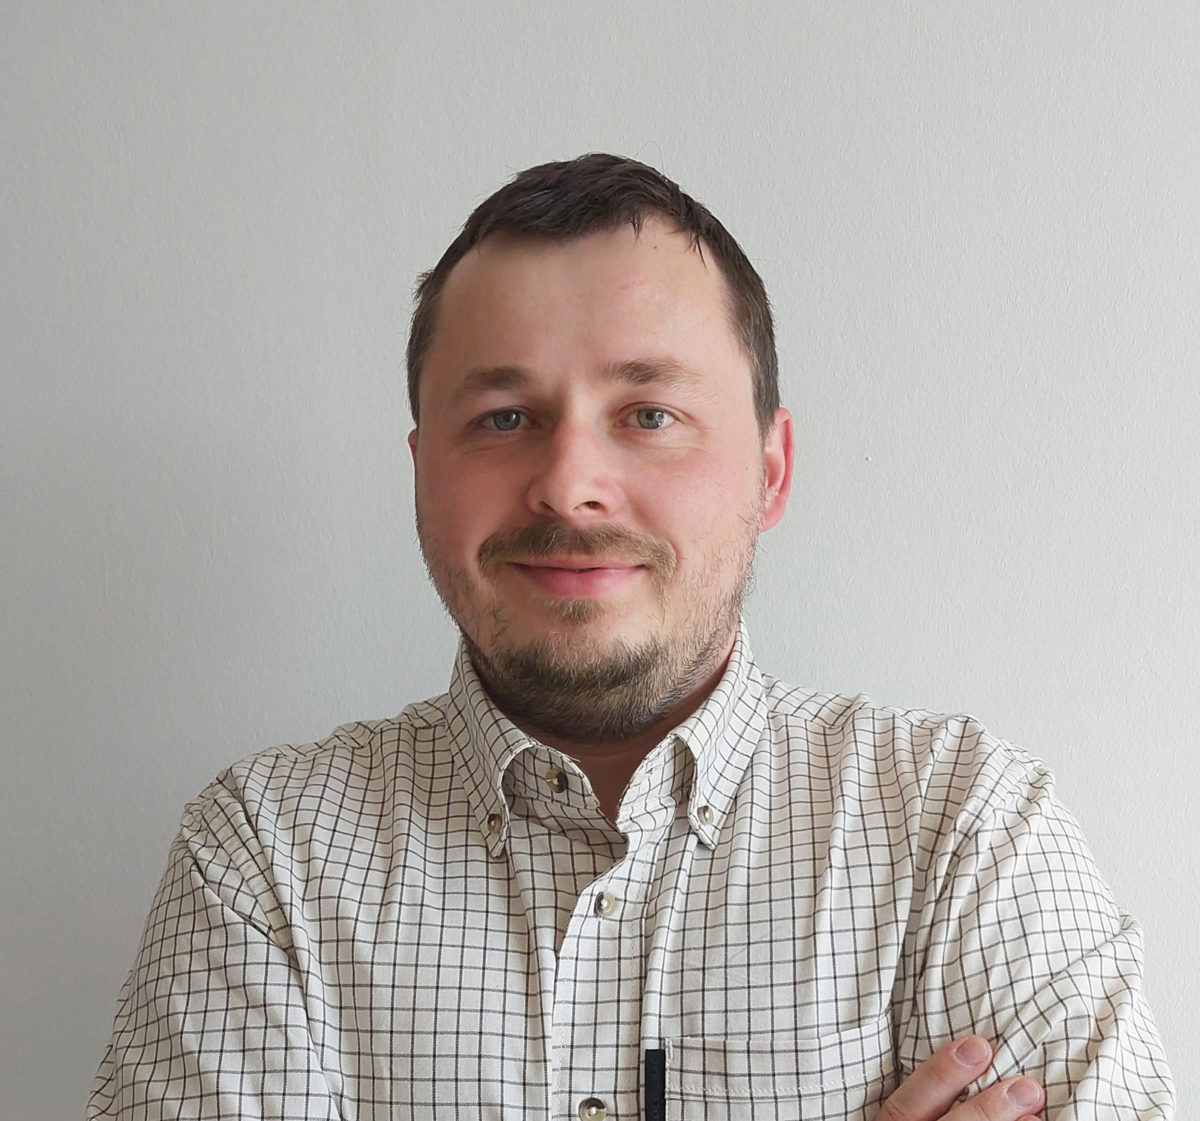 Michal Krelina, Research Scientist, Czech Technical University to speak on “Quantum Safe in the Military” at IQT Quantum Cybersecurity in NYC, Oct 25-27